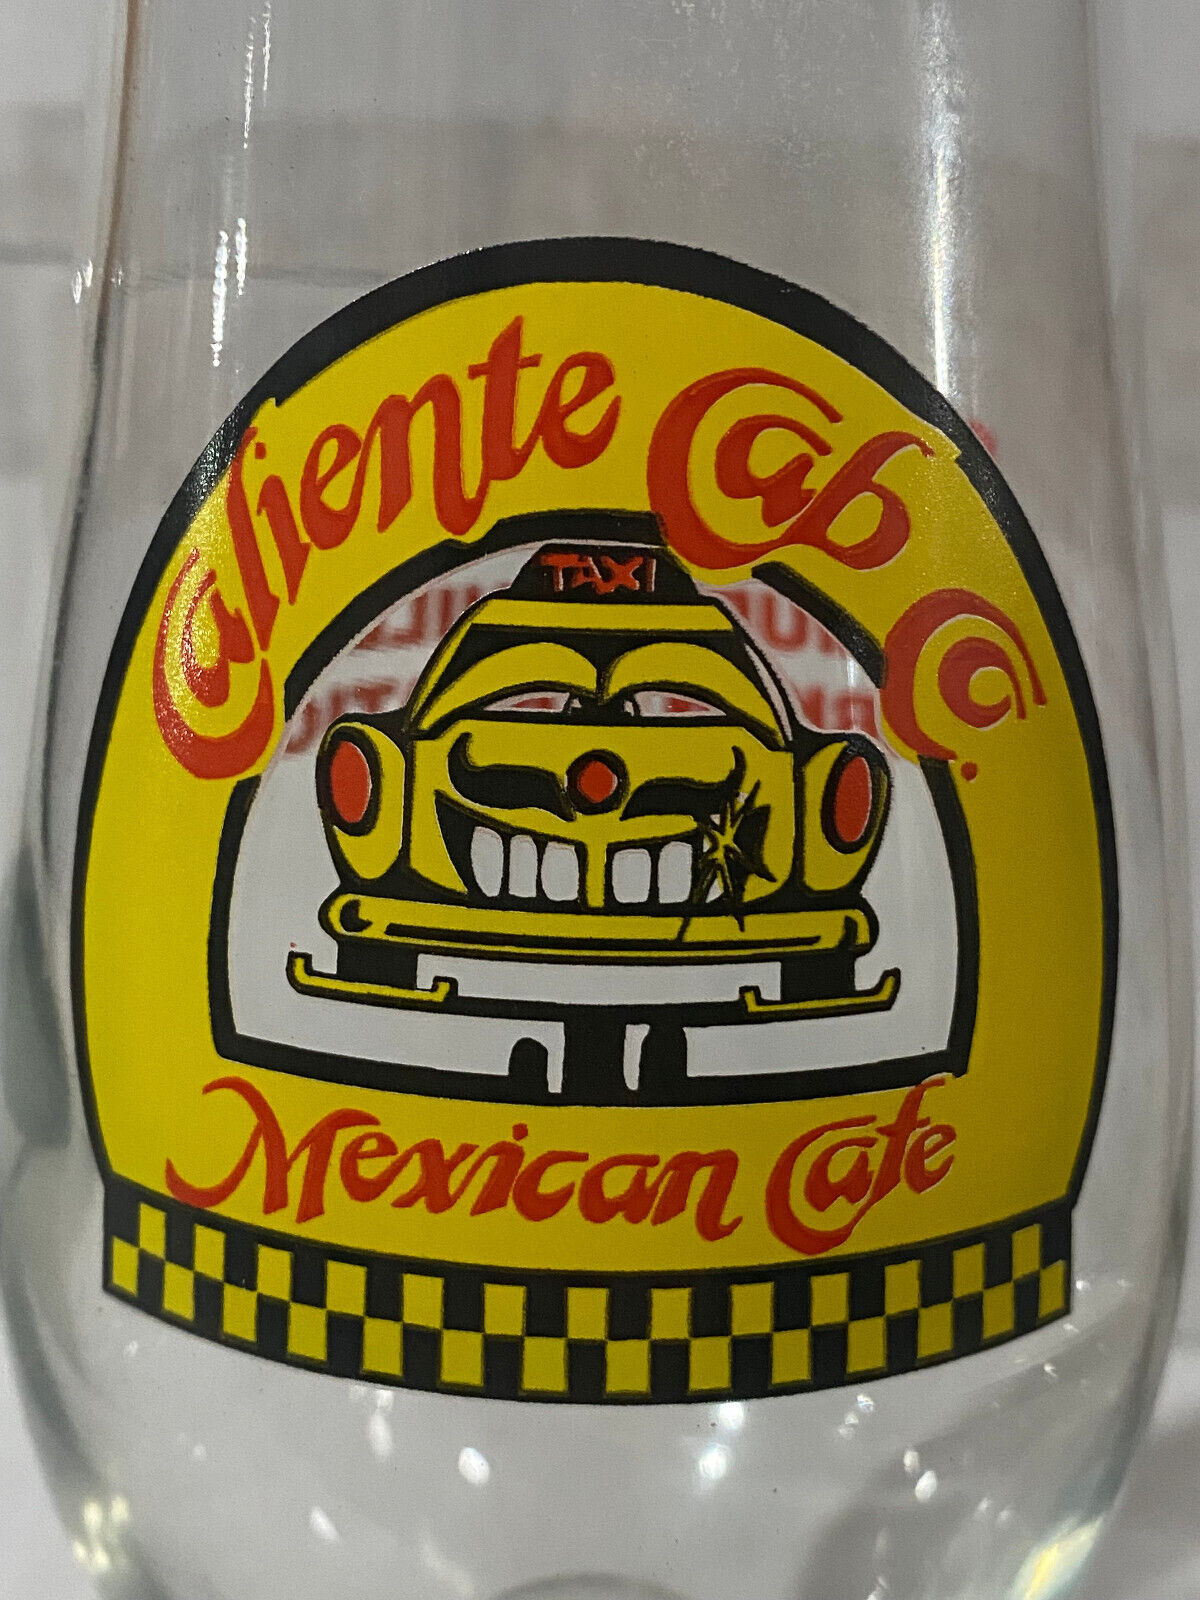 CALIENTE CAB COMPANY  NEW YORK MEXICAN CAFE HURRICANE COCKTAIL GLASS